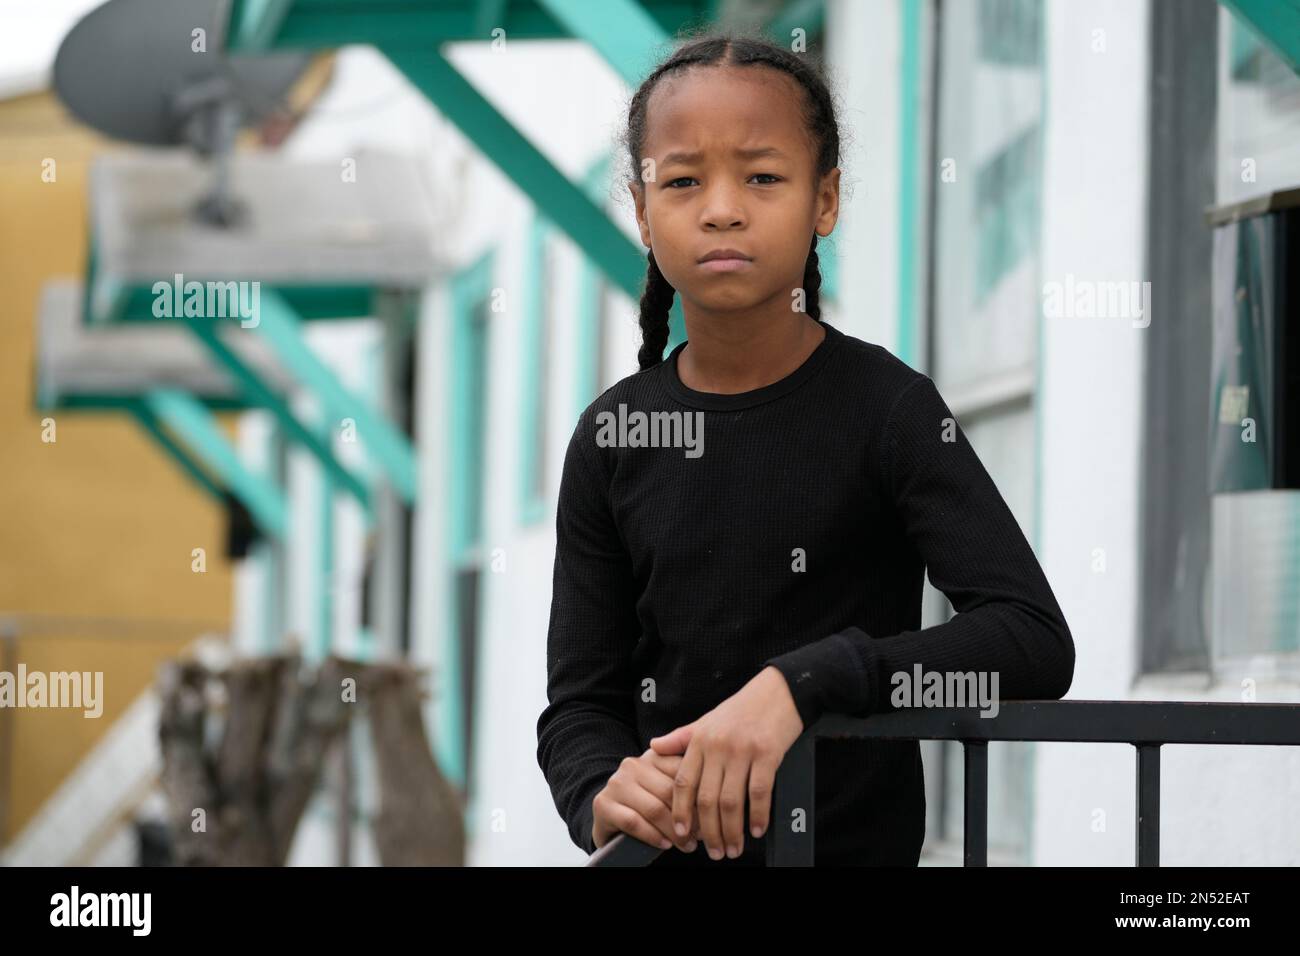 https://c8.alamy.com/comp/2N52EAT/ezekiel-west-10-stands-for-a-portrait-outside-his-home-in-los-angeles-on-sunday-jan-15-2023-at-least-three-of-the-students-that-lawyer-allison-hertog-has-represented-including-ezekiel-have-disappeared-from-school-for-long-periods-since-schools-resumed-in-person-instruction-their-situations-were-avoidable-she-said-its-pretty-disgraceful-that-the-school-systems-allowed-this-to-go-on-for-so-long-ap-photodamian-dovarganes-2N52EAT.jpg